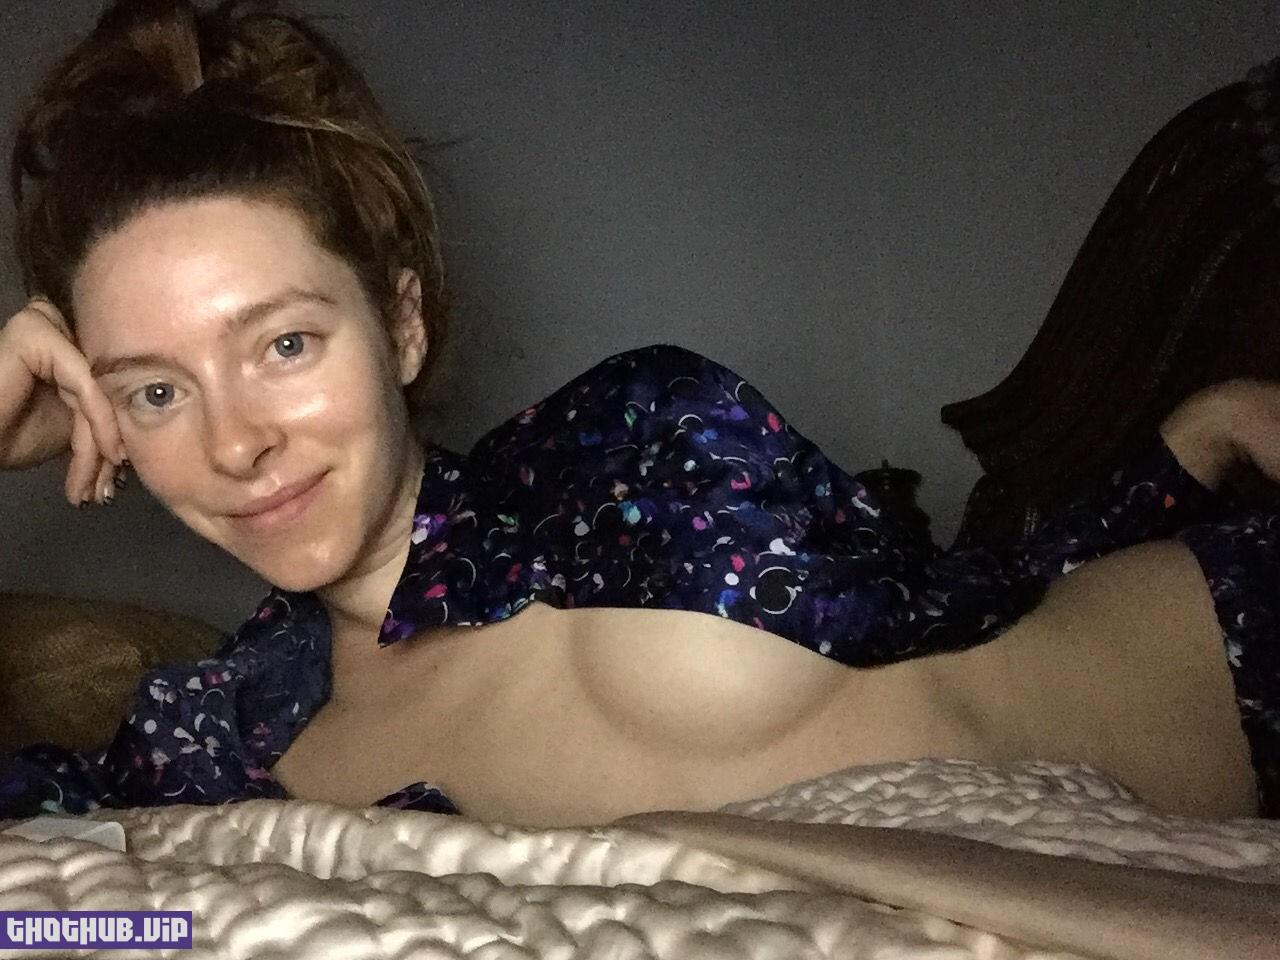 Kate Miller Gorney nude photos leaked from iCloud The Fappening